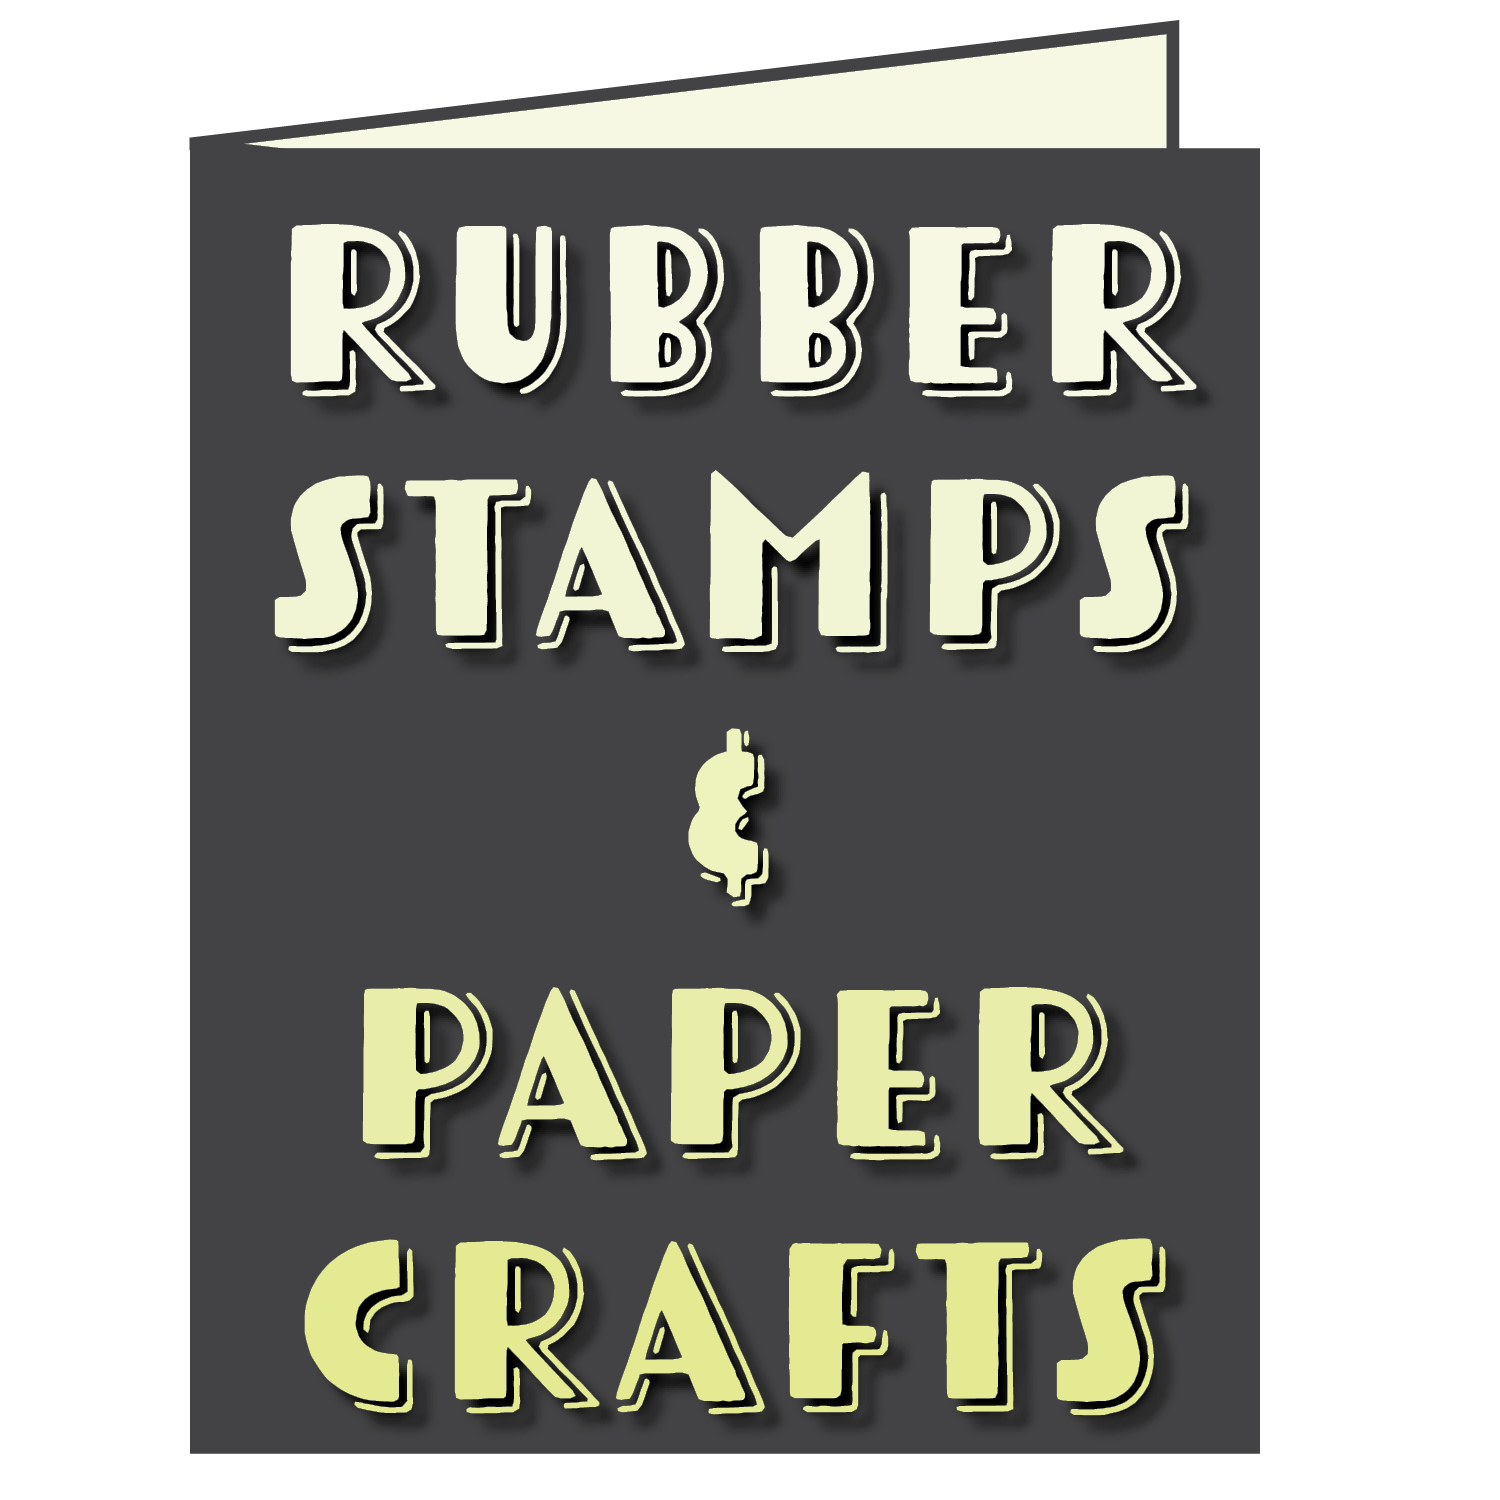 Rubber Stamps & Paper Crafts